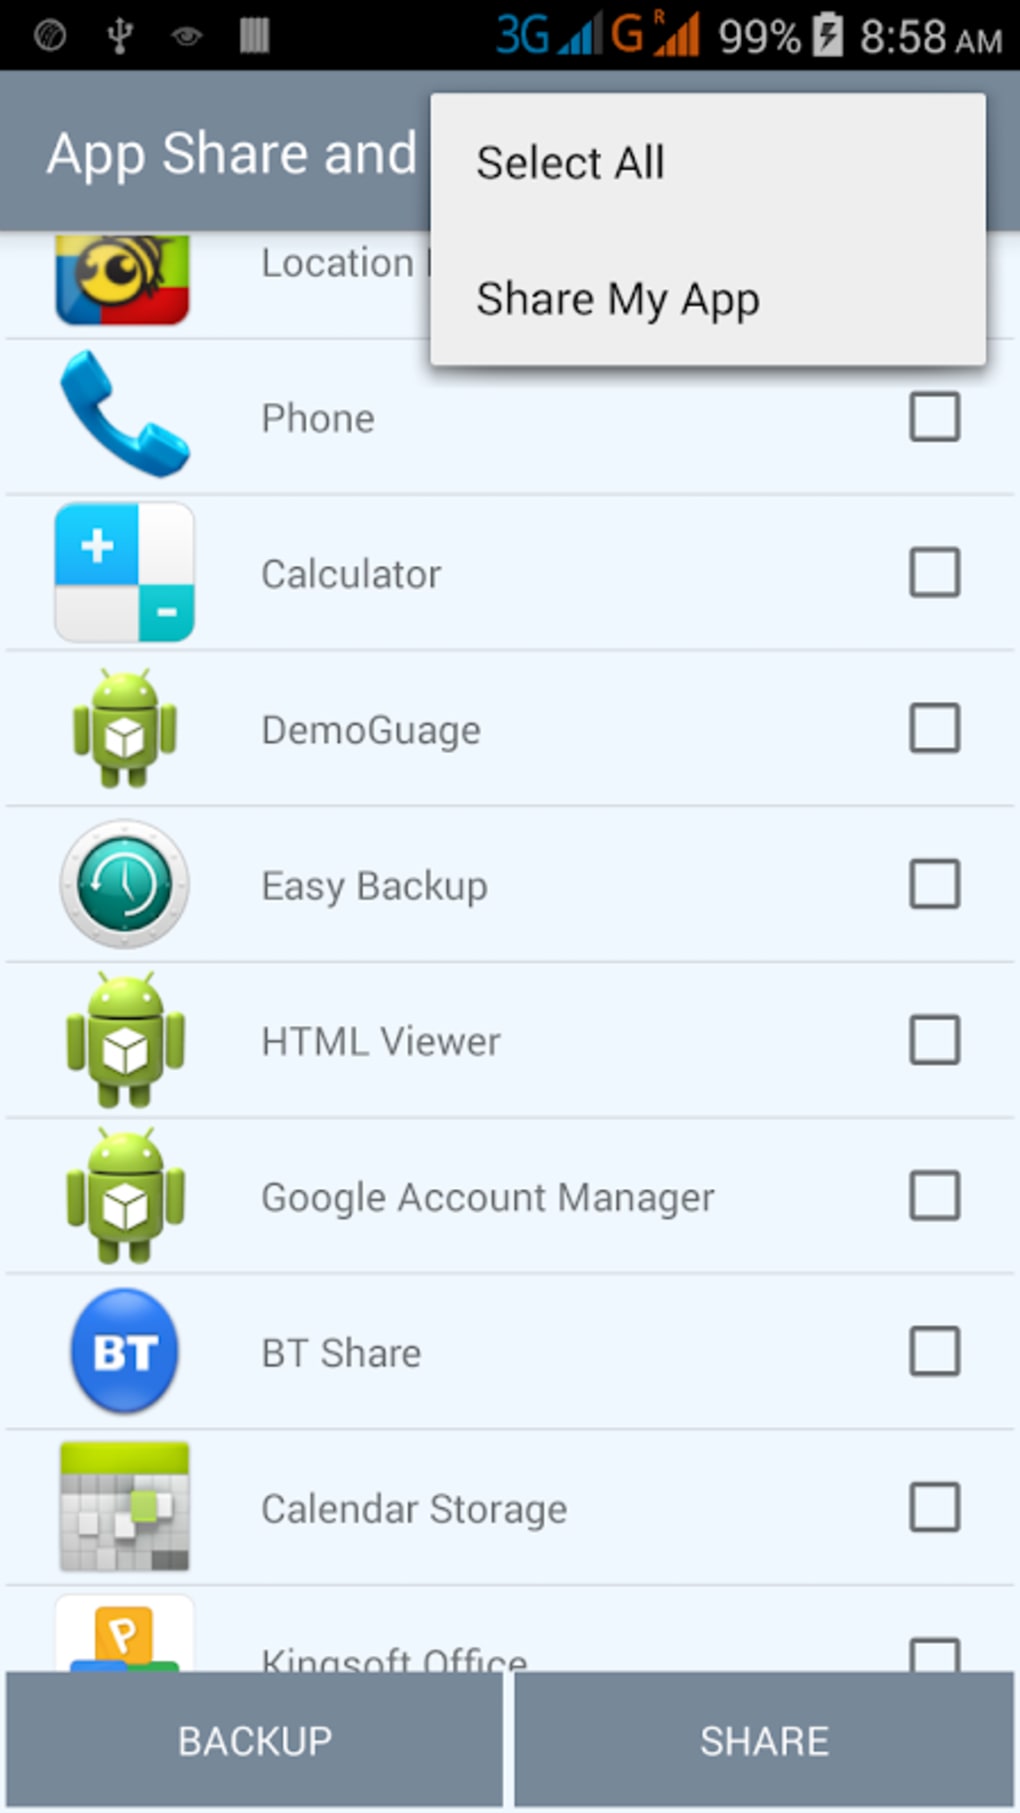 Блютуз ватсап. APPSHARE. Share app. Android Backup APK. Share apps инструкция на русском языке.